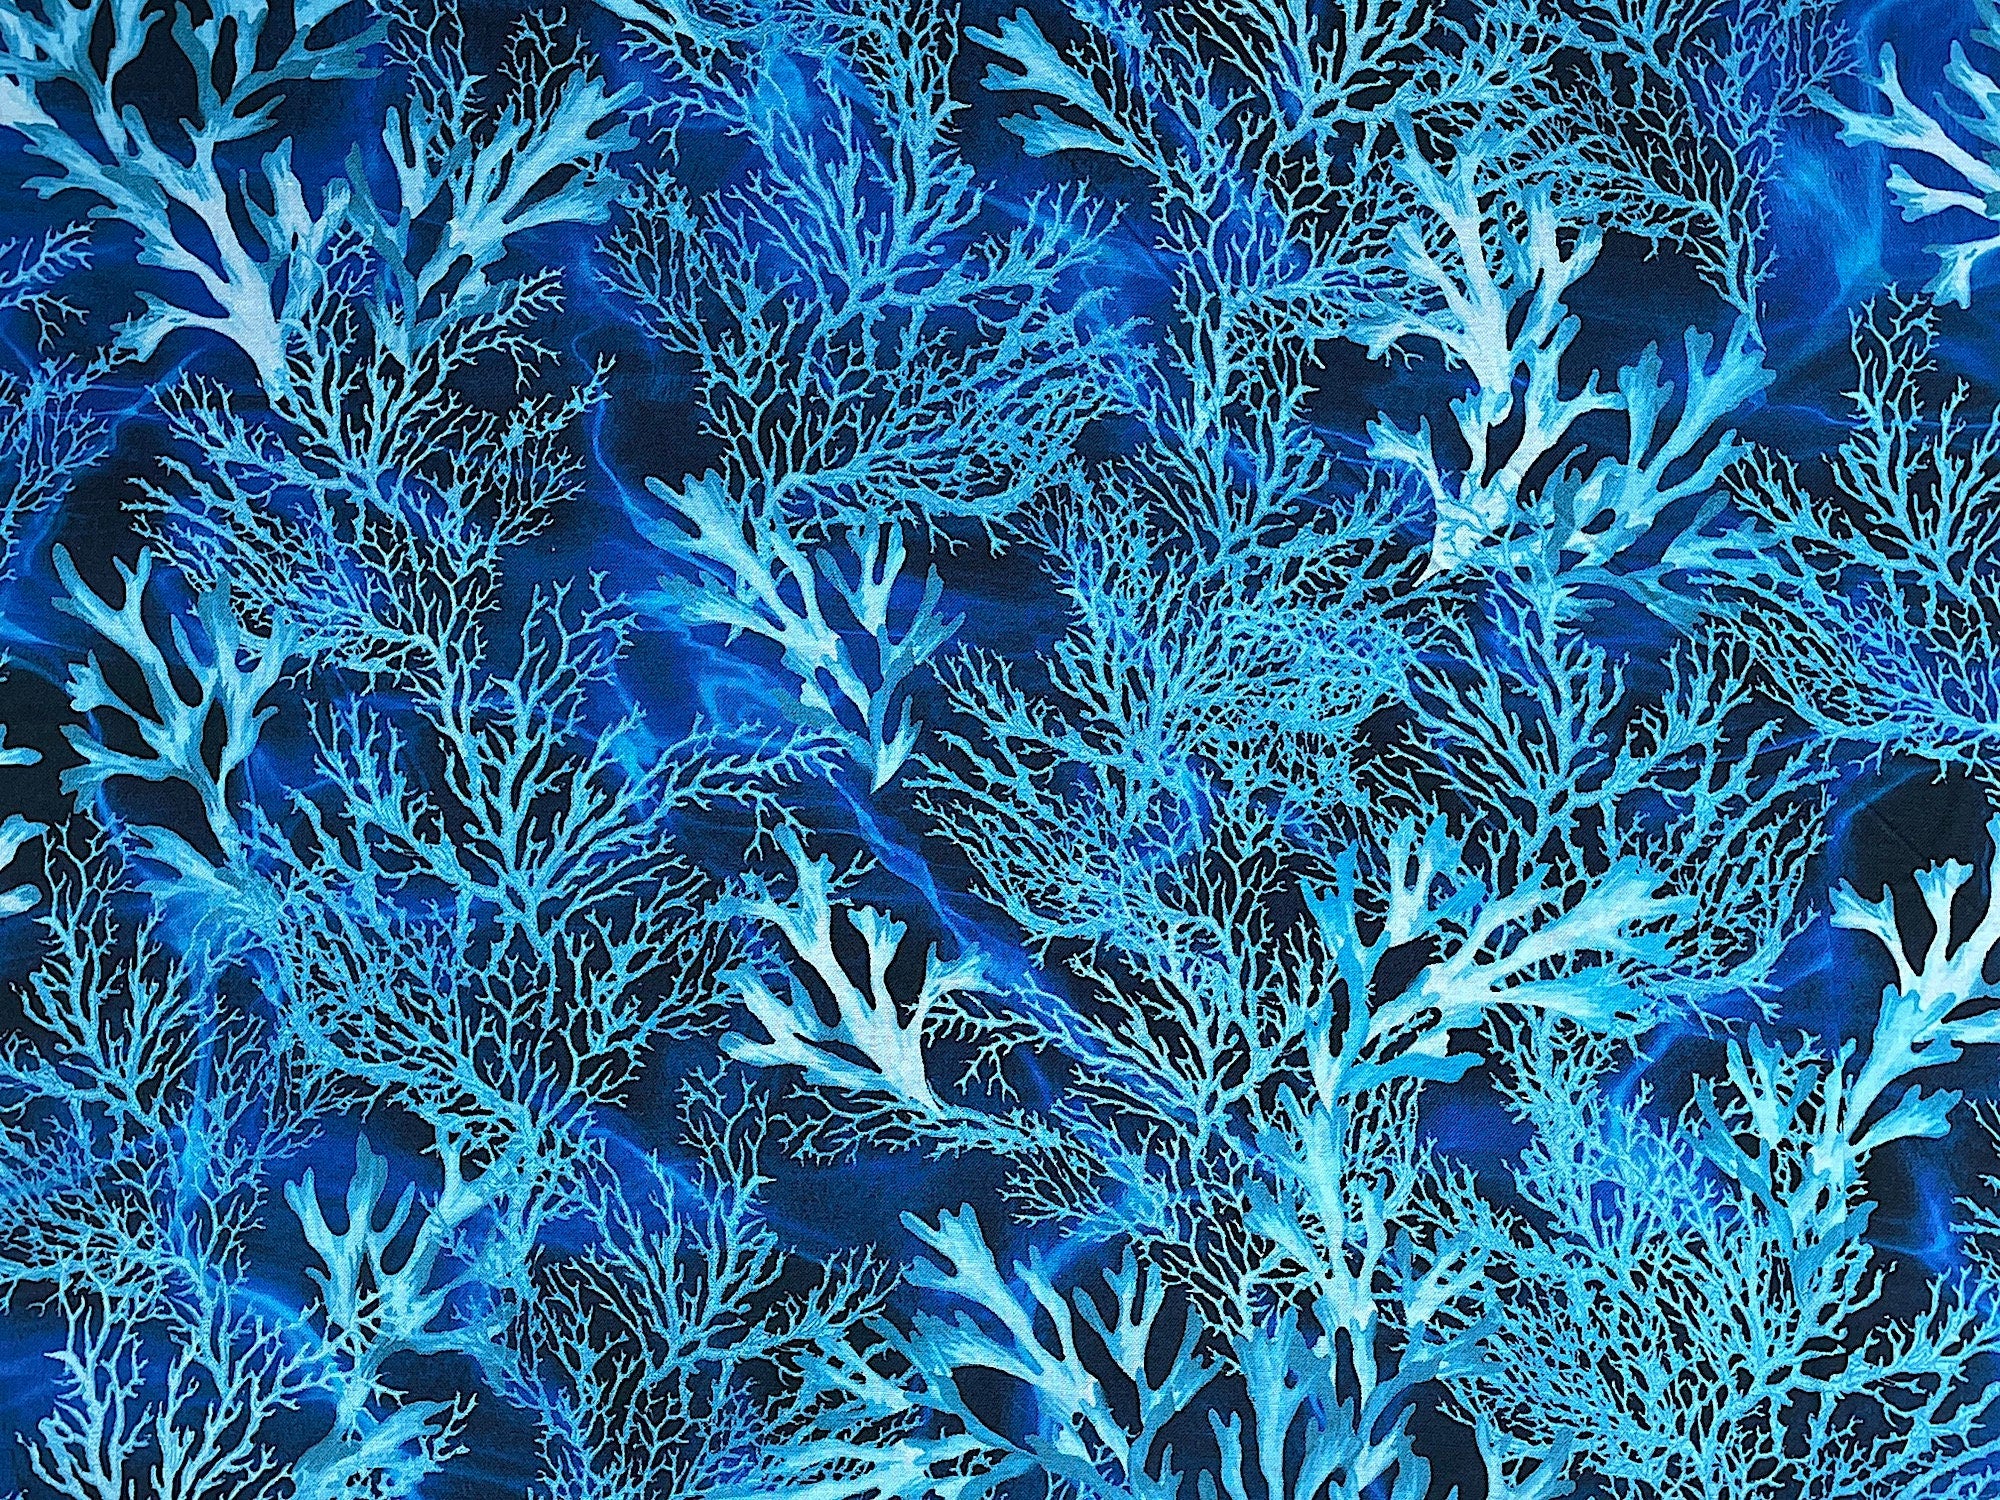 This fabric is called Coral Dance. This blue fabric is covered with coral. This fabric is part of the Oceana collection by Kanvas Studio.